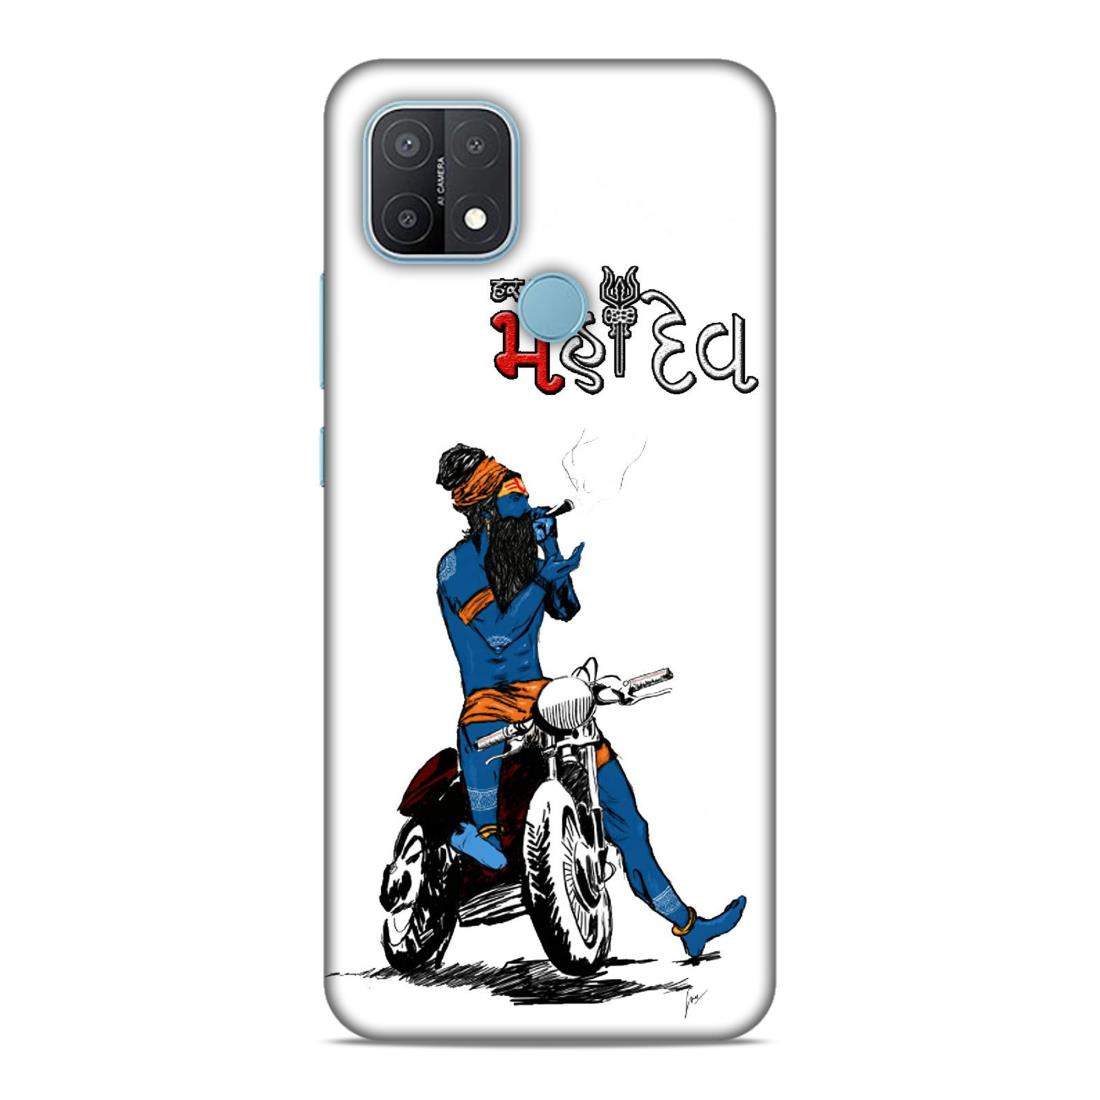 Lord Mahadev Hard Back Case For Oppo A15 / A15s